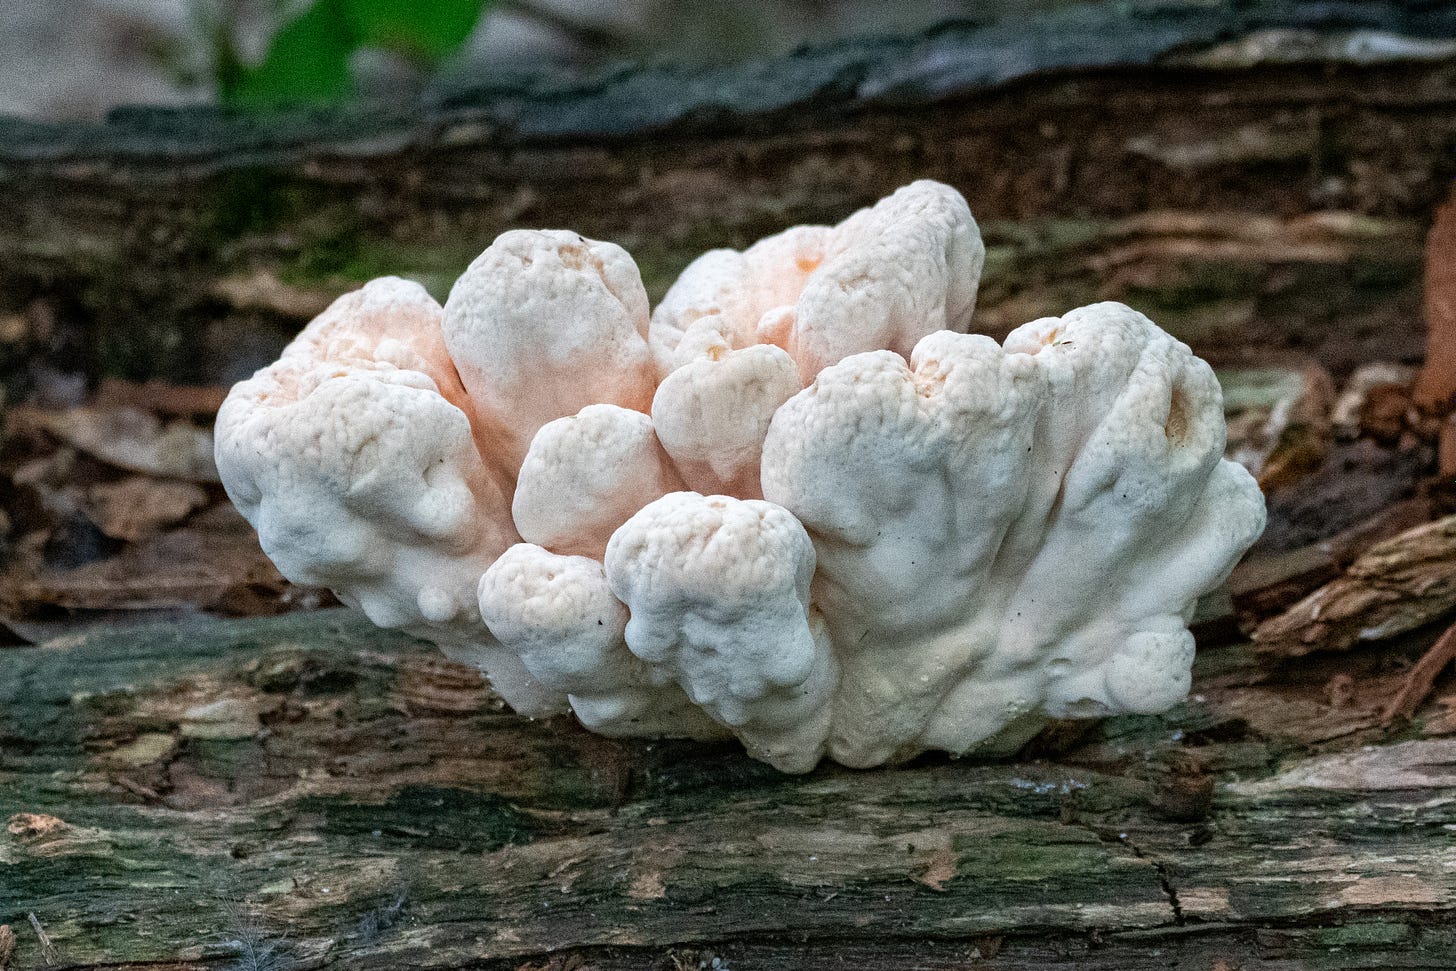 A luminous, cream-colored, globular bracket fungus, sprouting from a rotting log